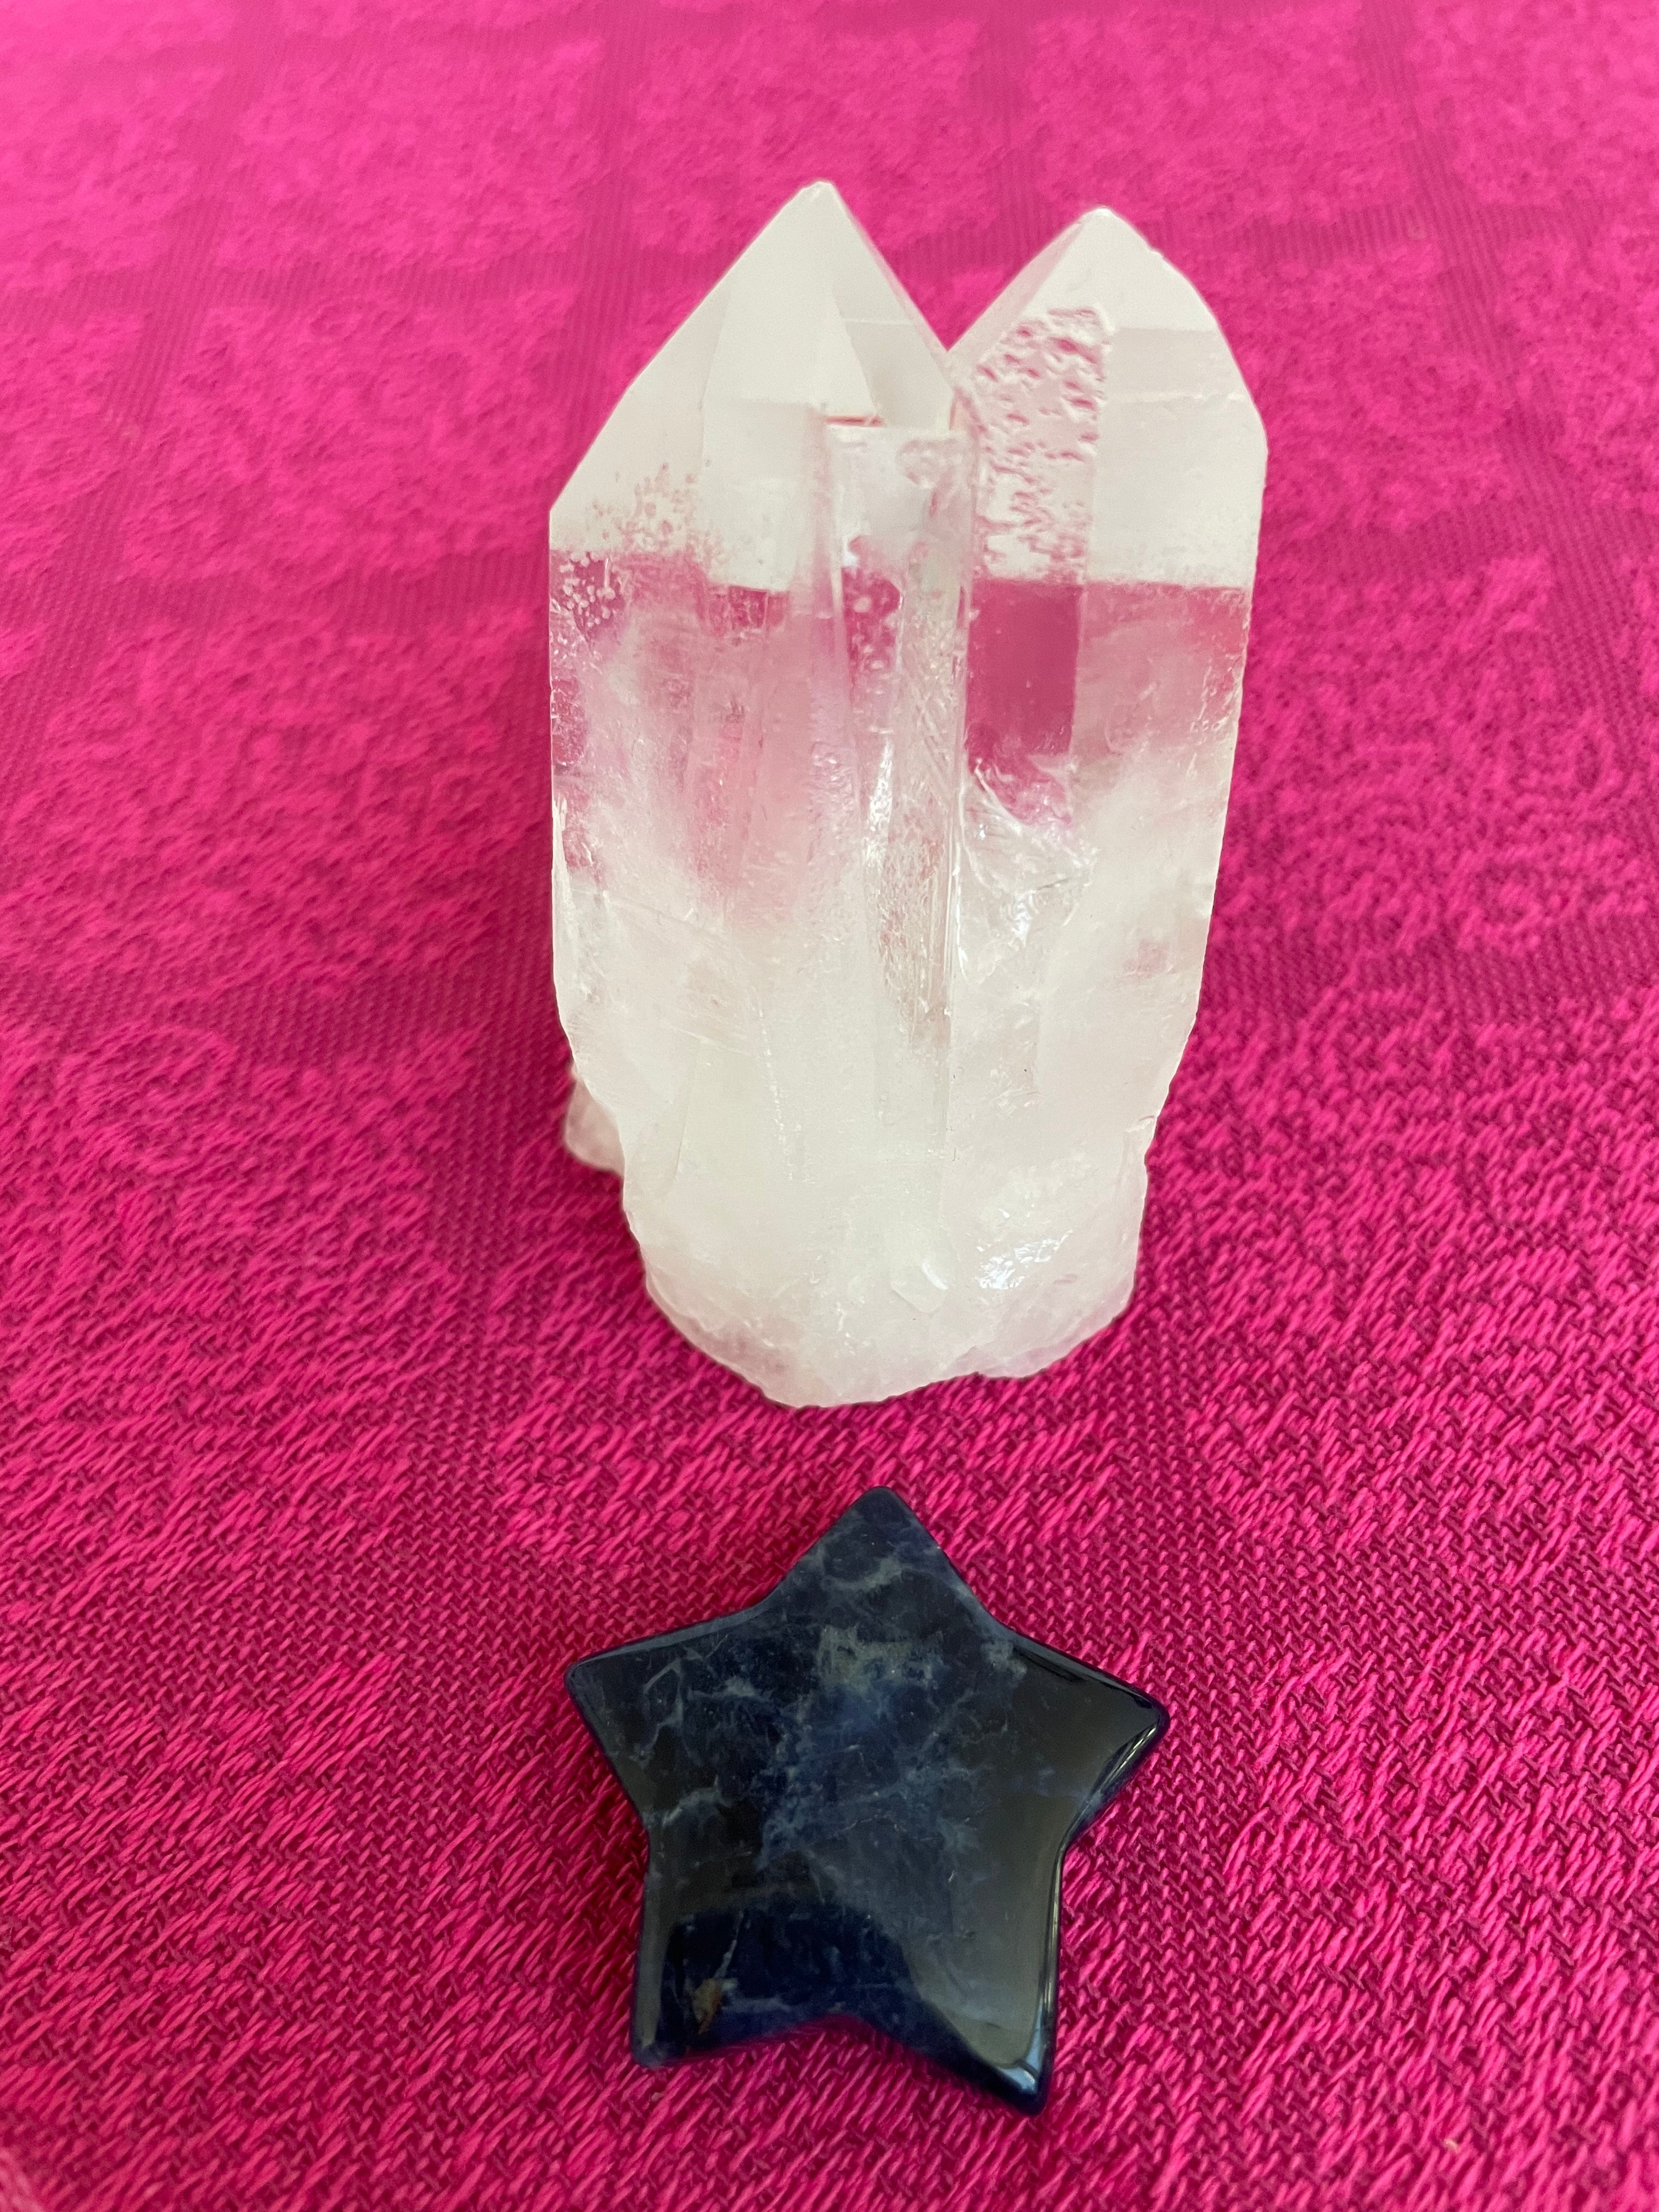 ﻿This powerful little sodalite crystal star can be used for meditation, healing, as an altar piece or as décor for any room in your home or office. Makes a wonderful gift too! Easy to slip right into your pocket so you can take the energy of sodalite wherever you go! Sodalite "Unites logic with intuition and opens spiritual perception" (Judy Hall). Approx. 1¼". Cost is $6. 